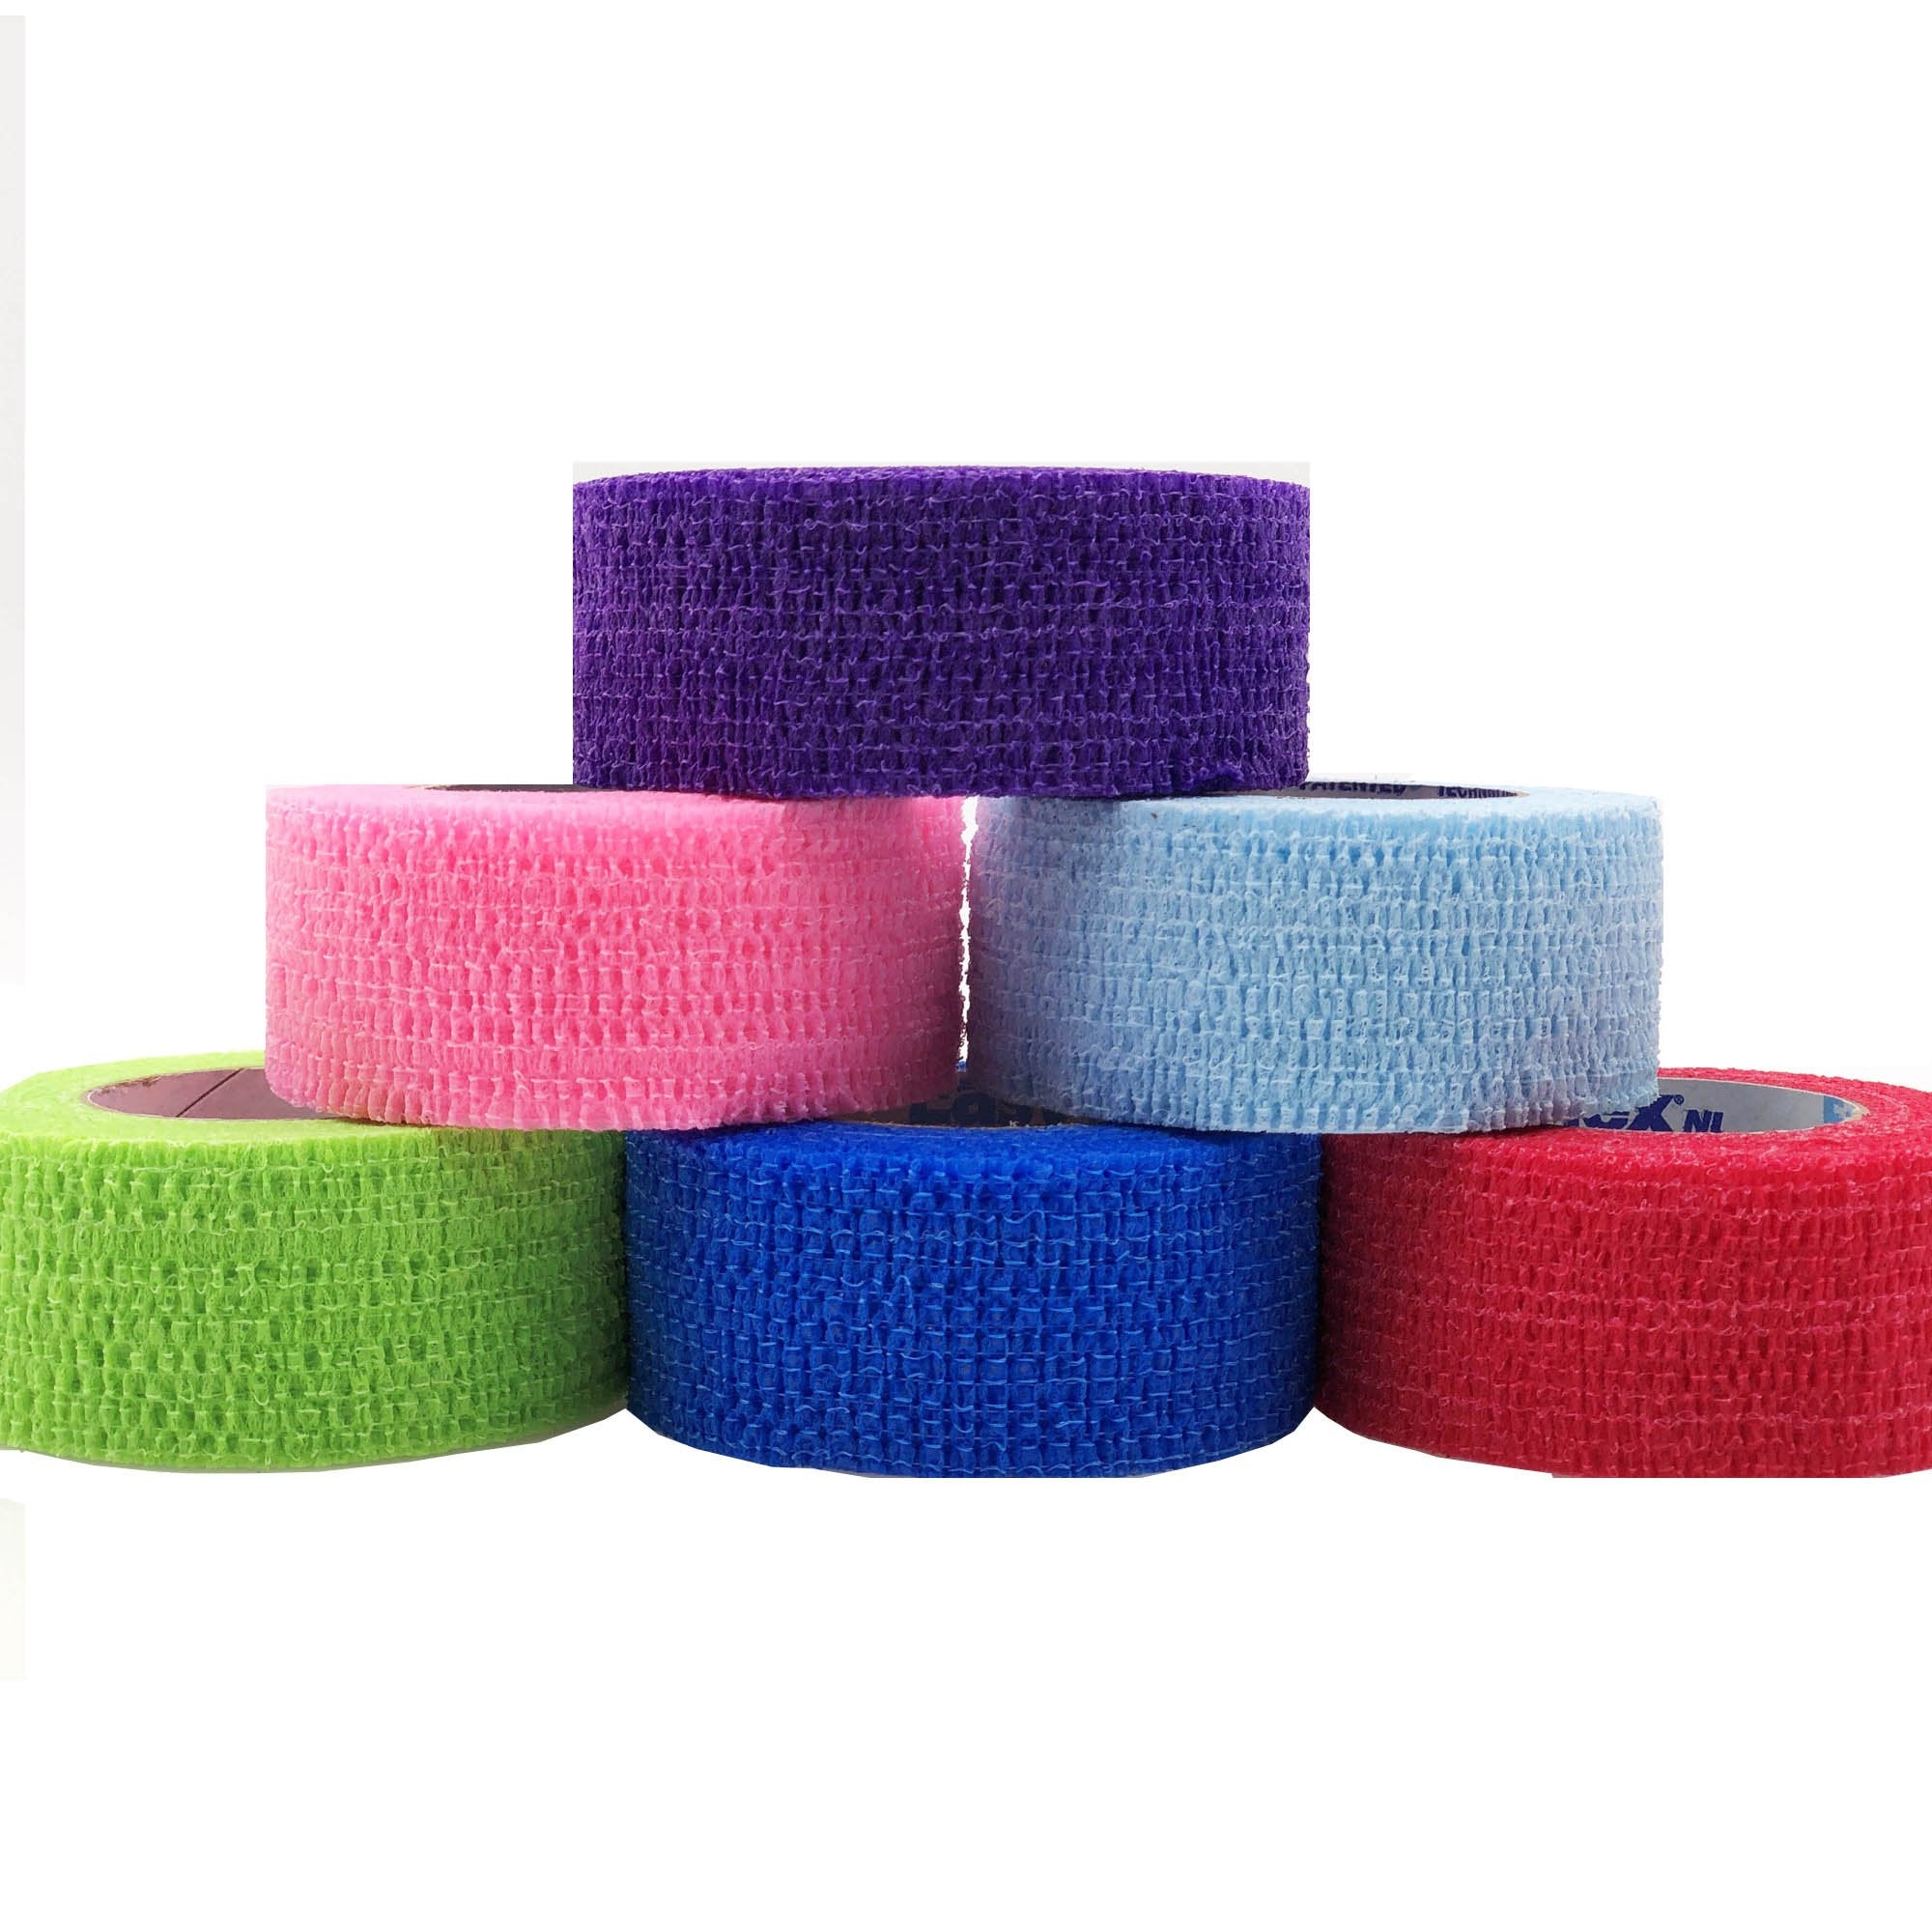 Cohesive Bandage CoFlex® NL 1 Inch X 5 Yard Self-Adherent Closure Neon Pink / Blue / Purple / Light Blue / Neon Green / Red NonSterile 12 lbs. Tensile Strength